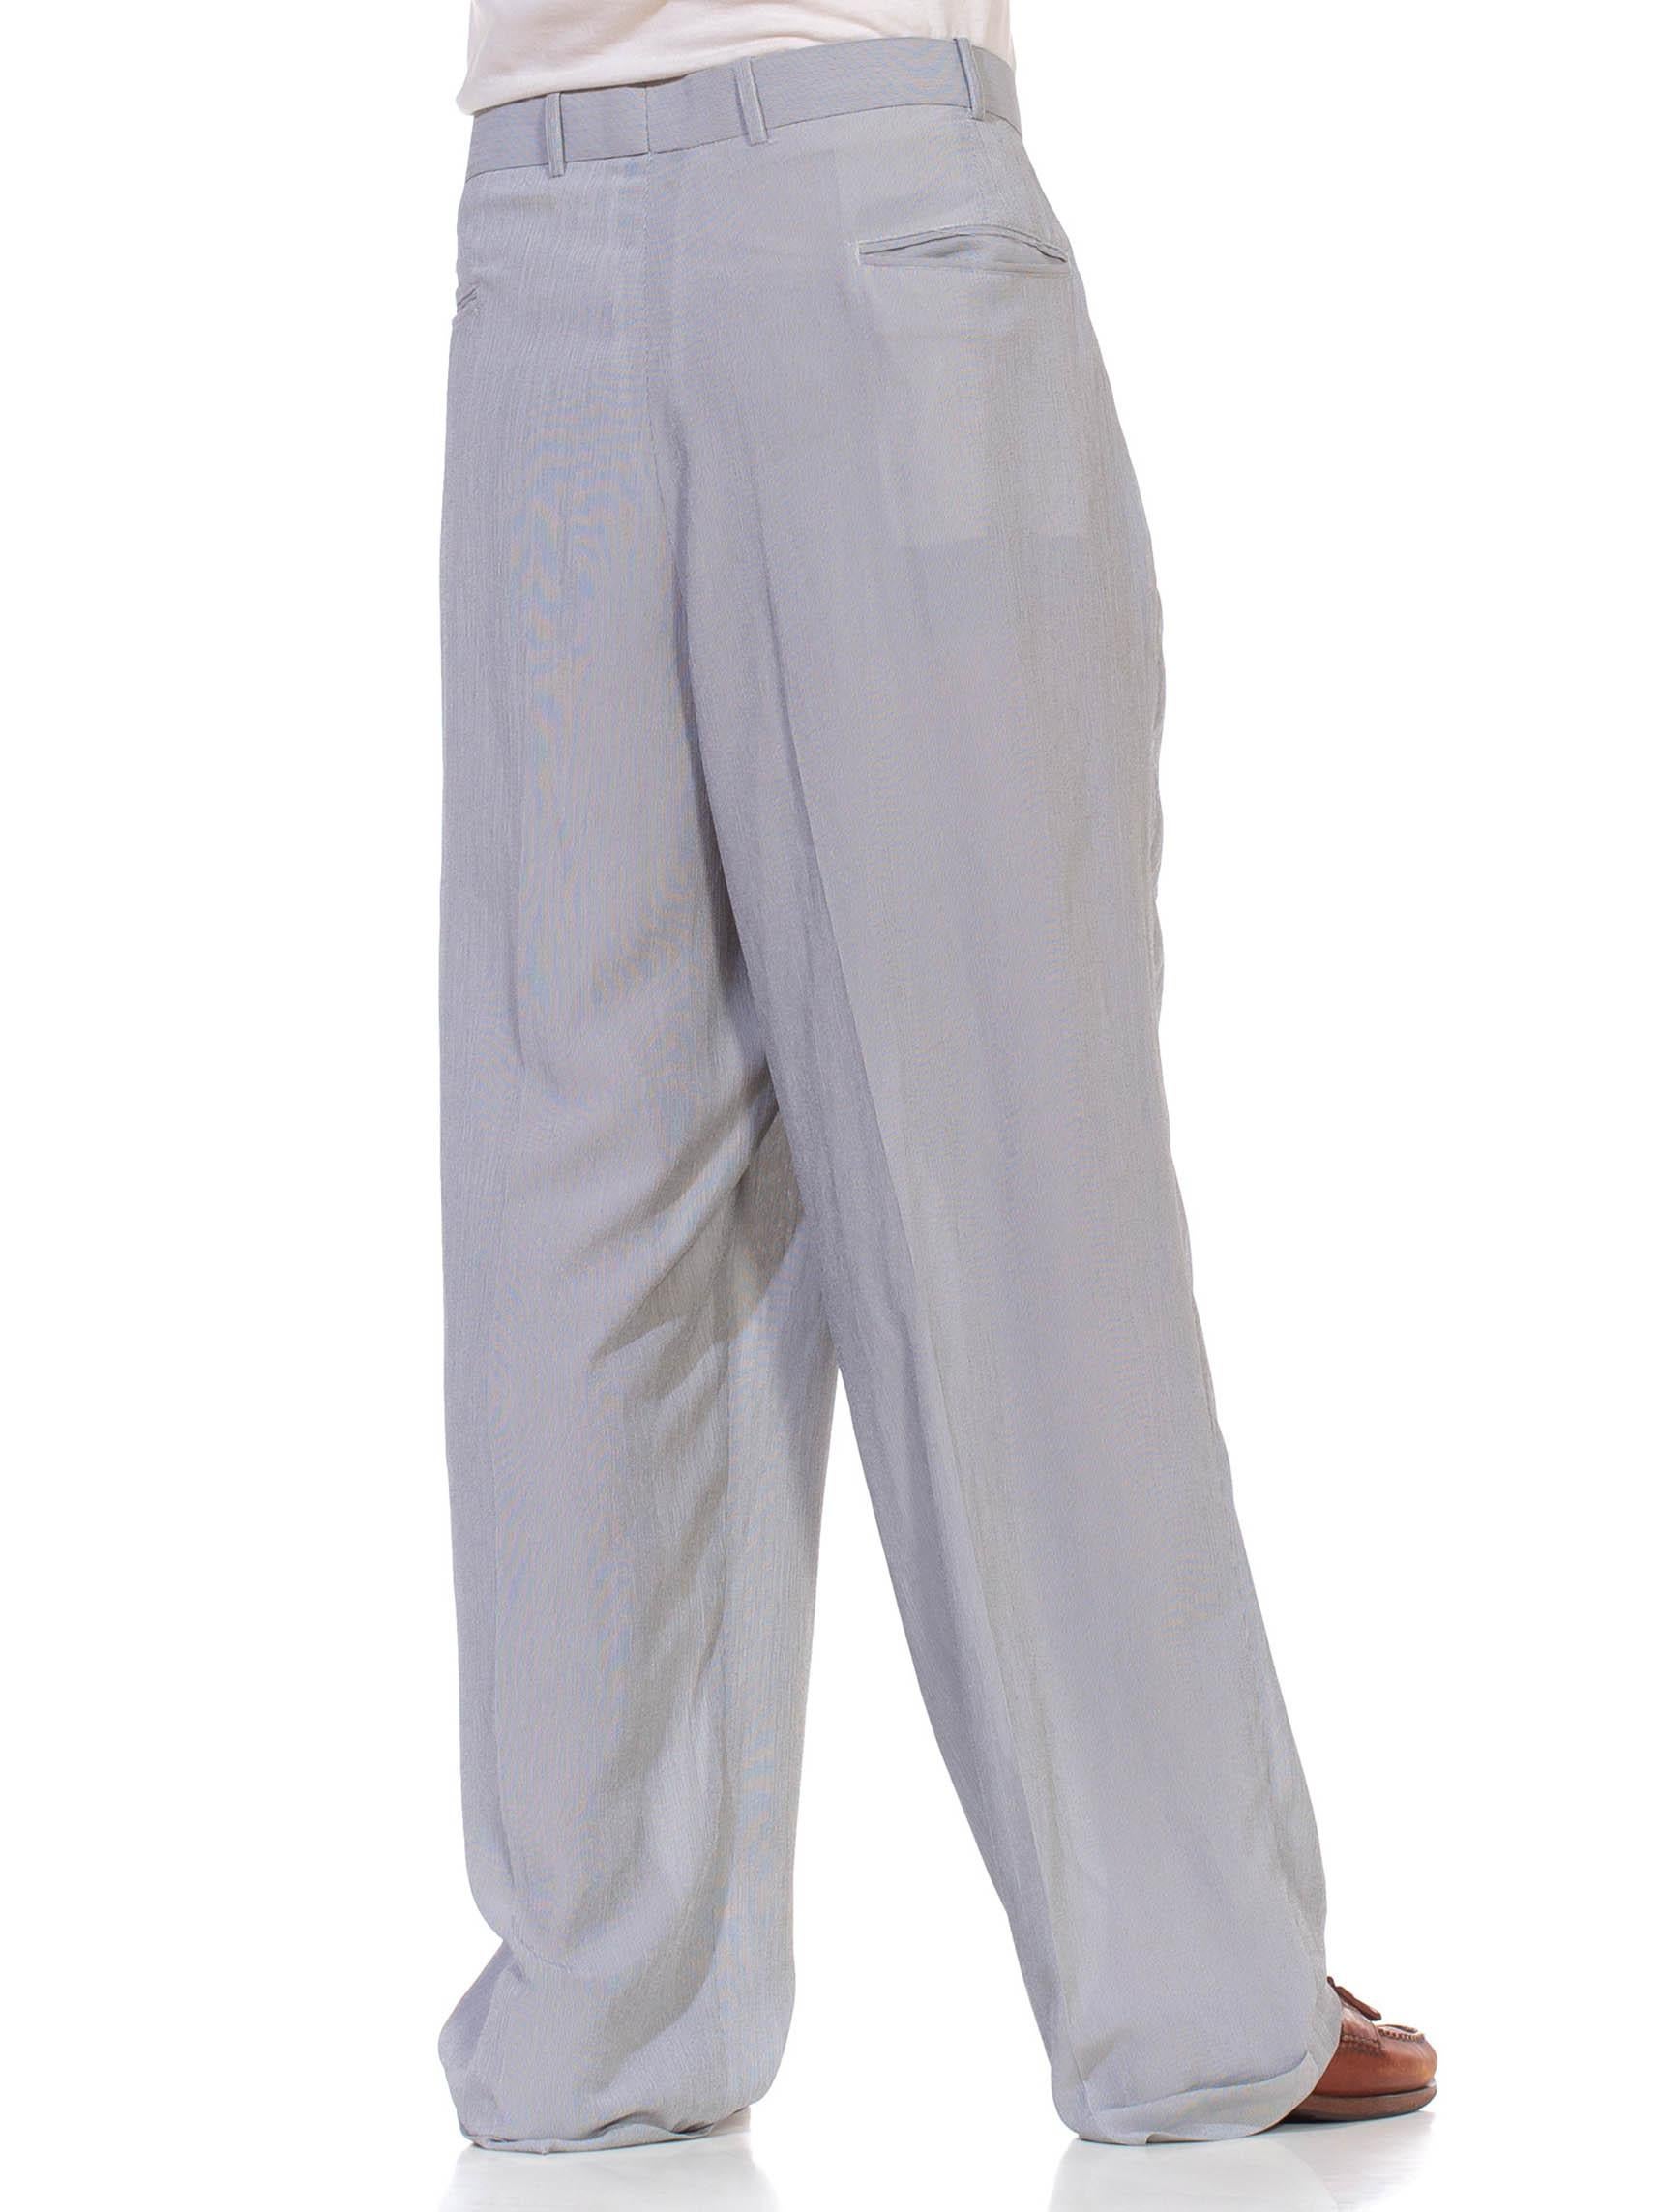 1990S Grey Polyester Rat Pack Style Men's Very Lightweight Crepe Pants In Excellent Condition For Sale In New York, NY